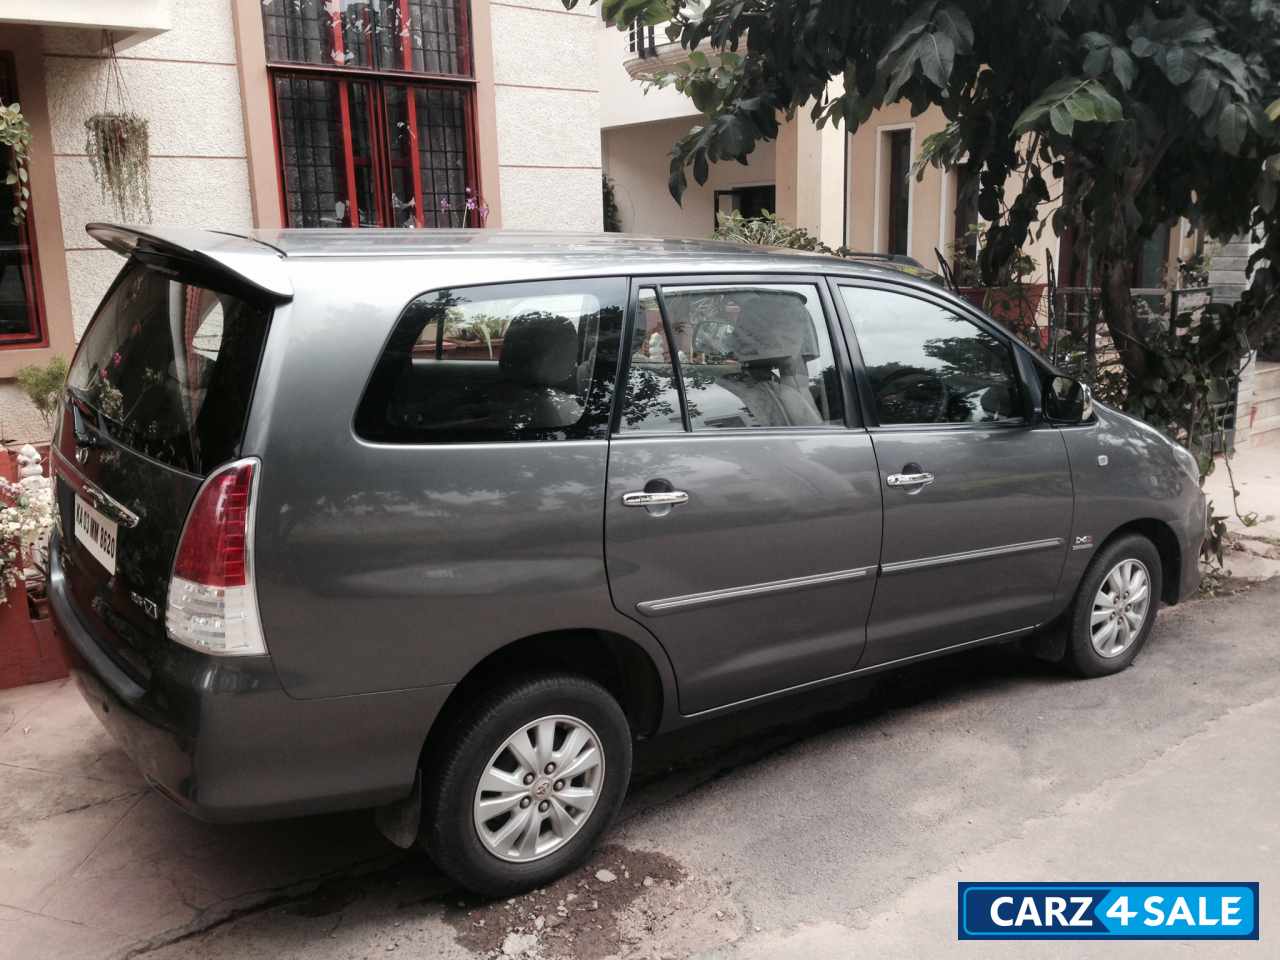 Used 2010 model Toyota Innova for sale in Bangalore. ID 4075. Grey